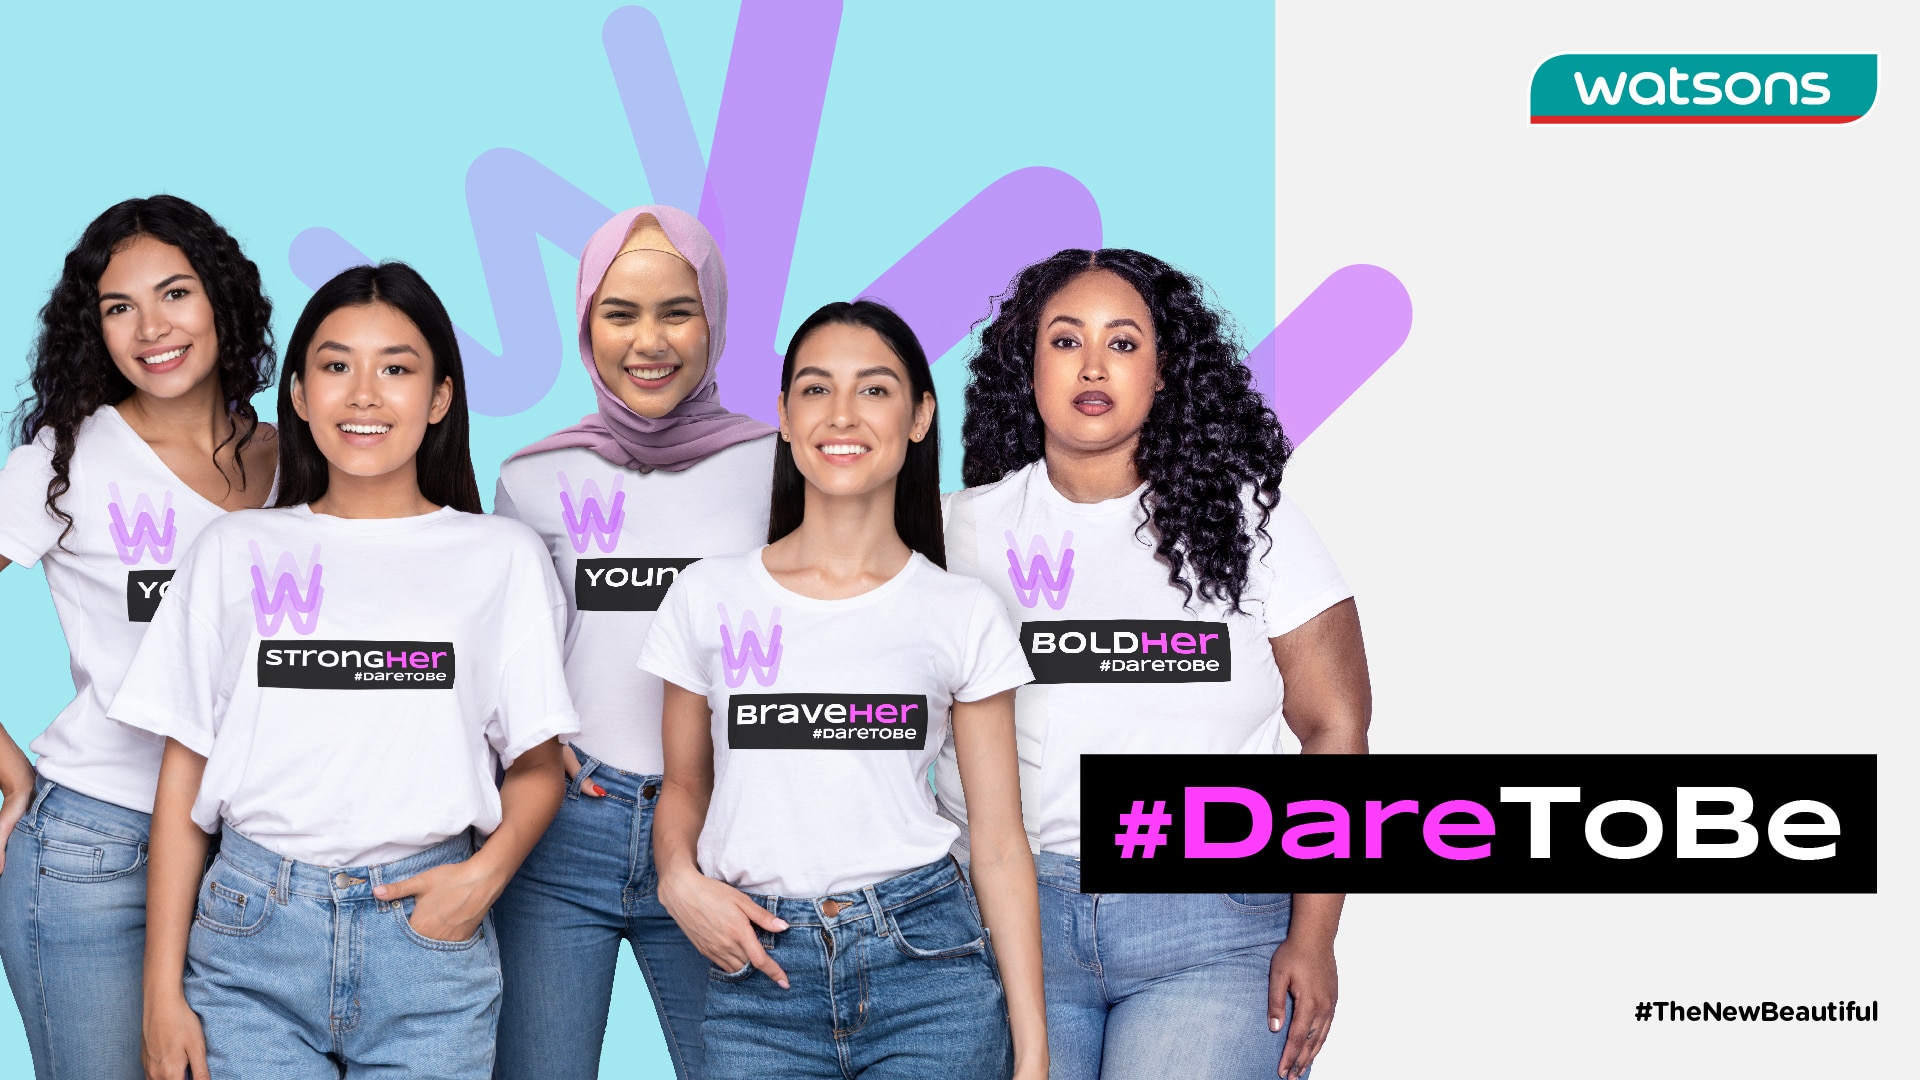 Watsons Empowers Women to “DARE TO BE”